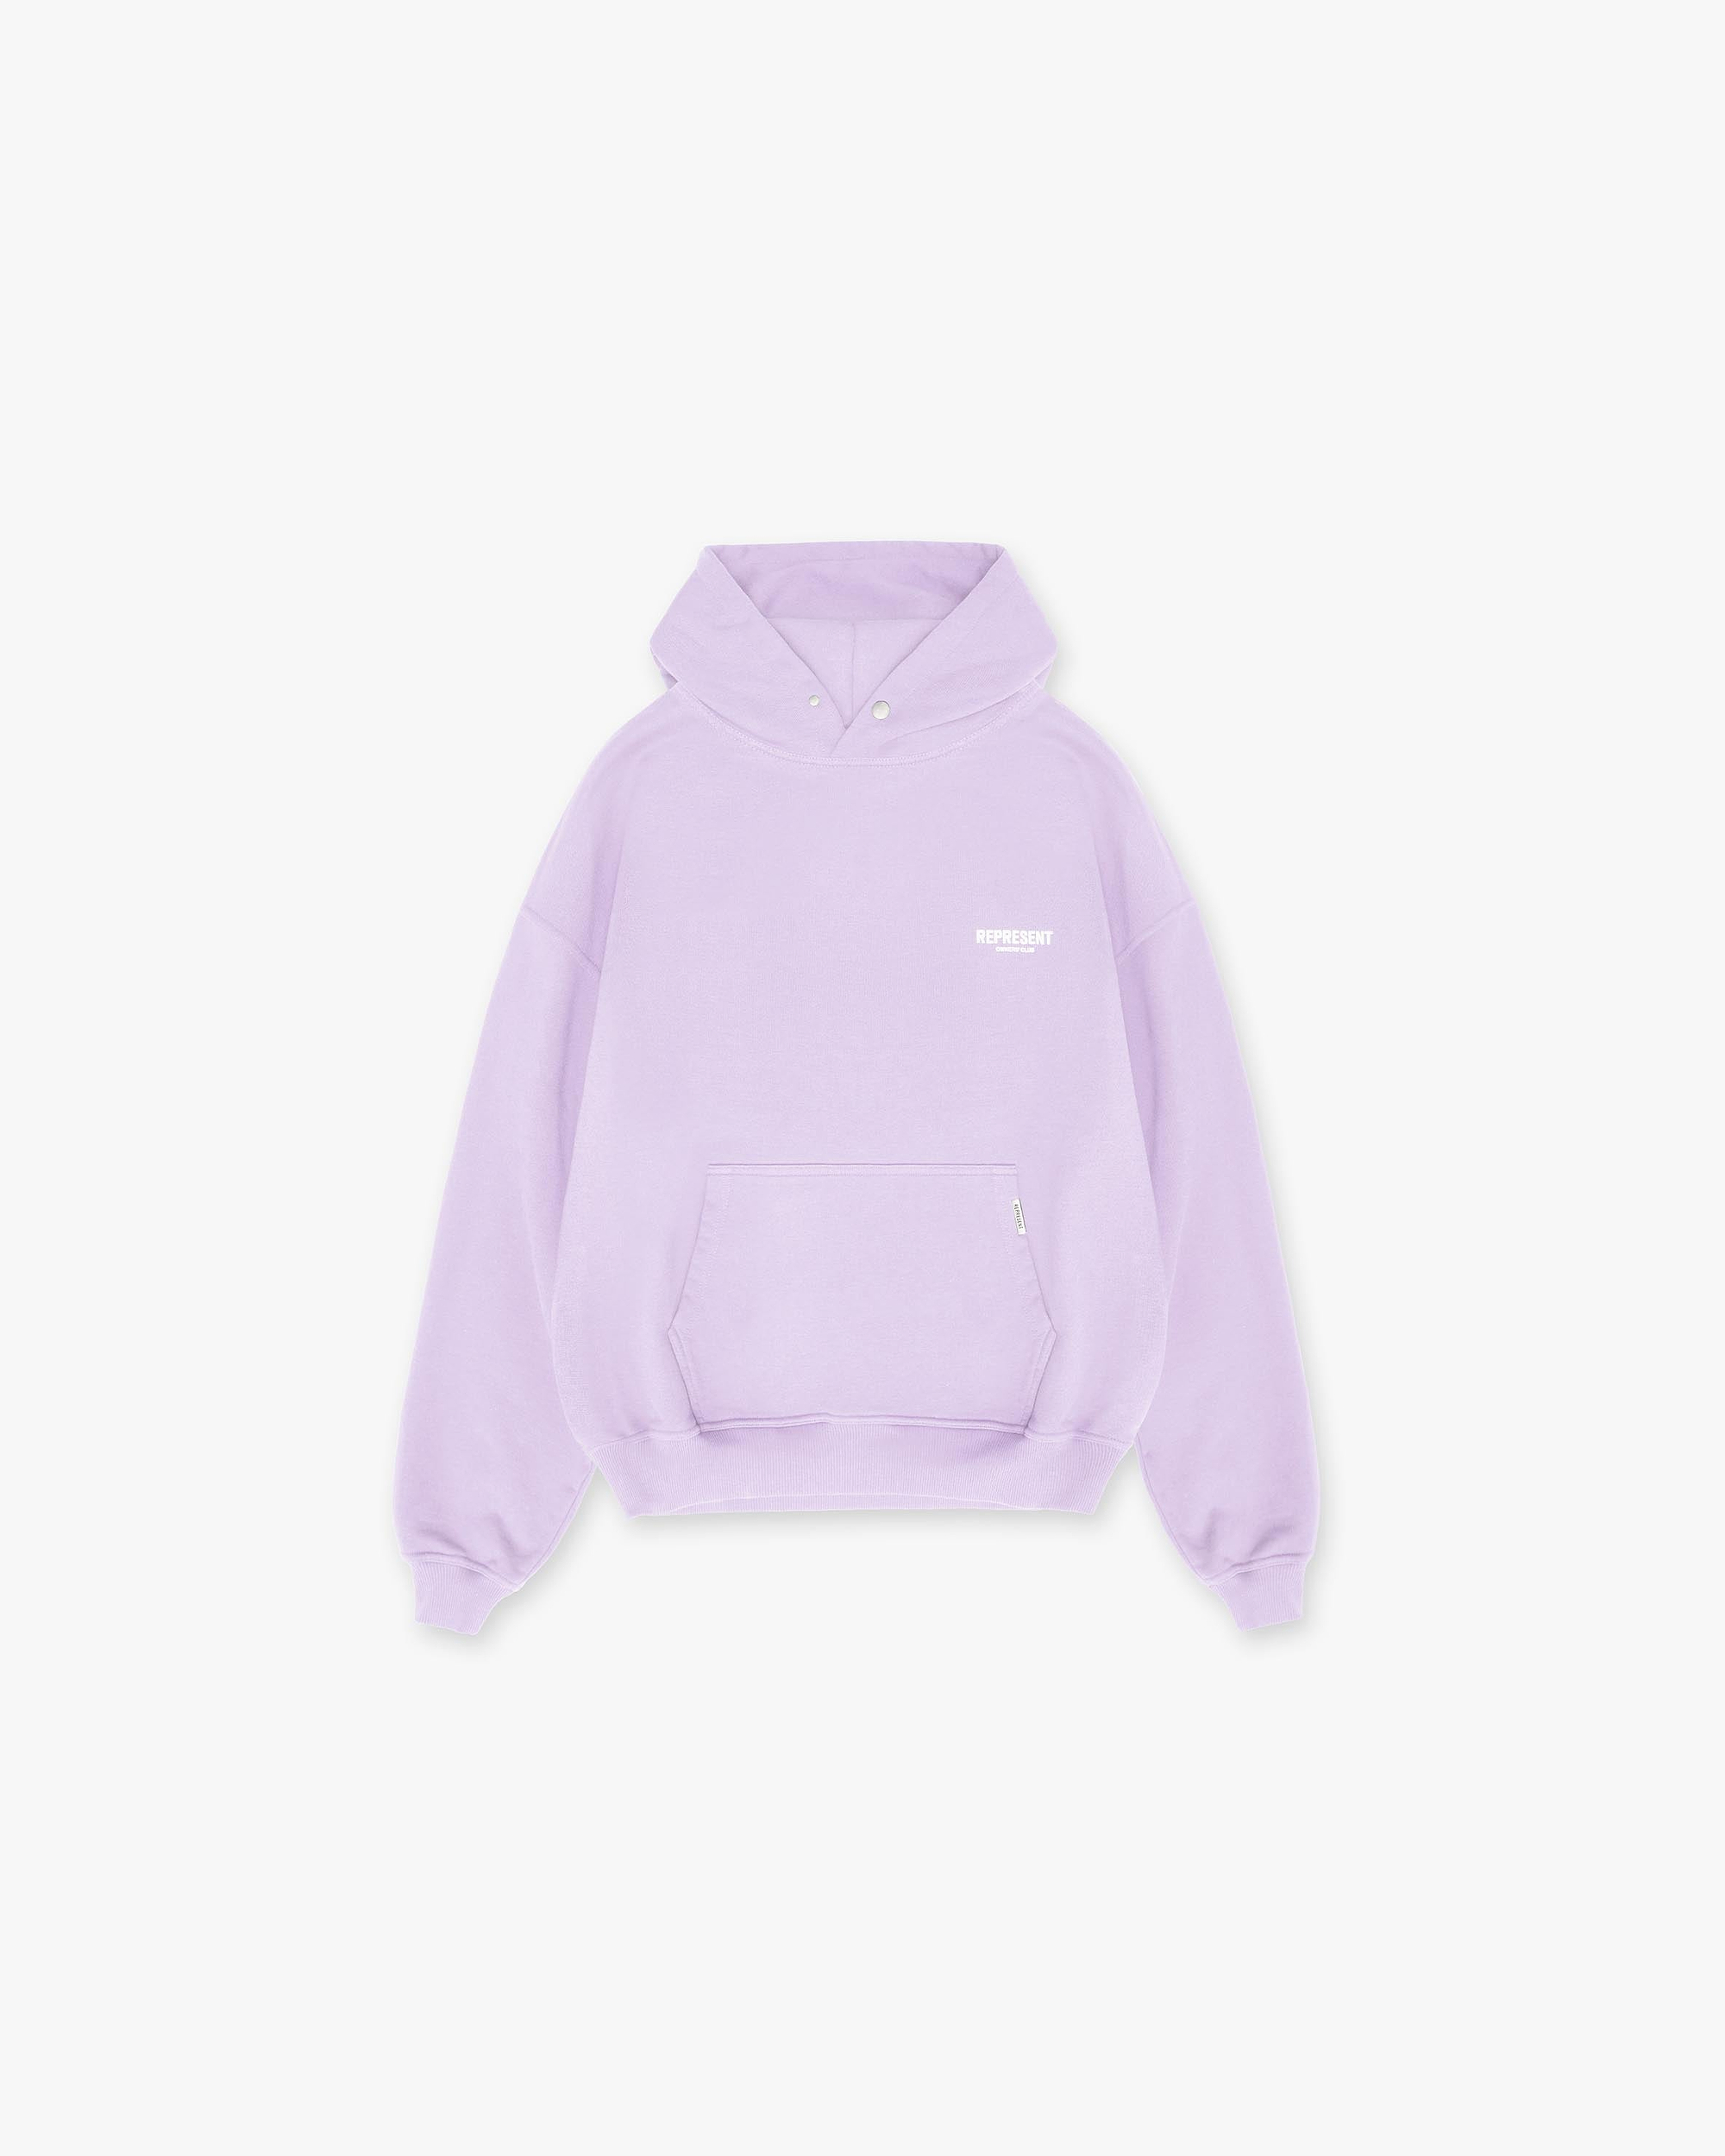 Represent Owners Club Hoodie | Lilac Hoodies Owners Club | Represent Clo